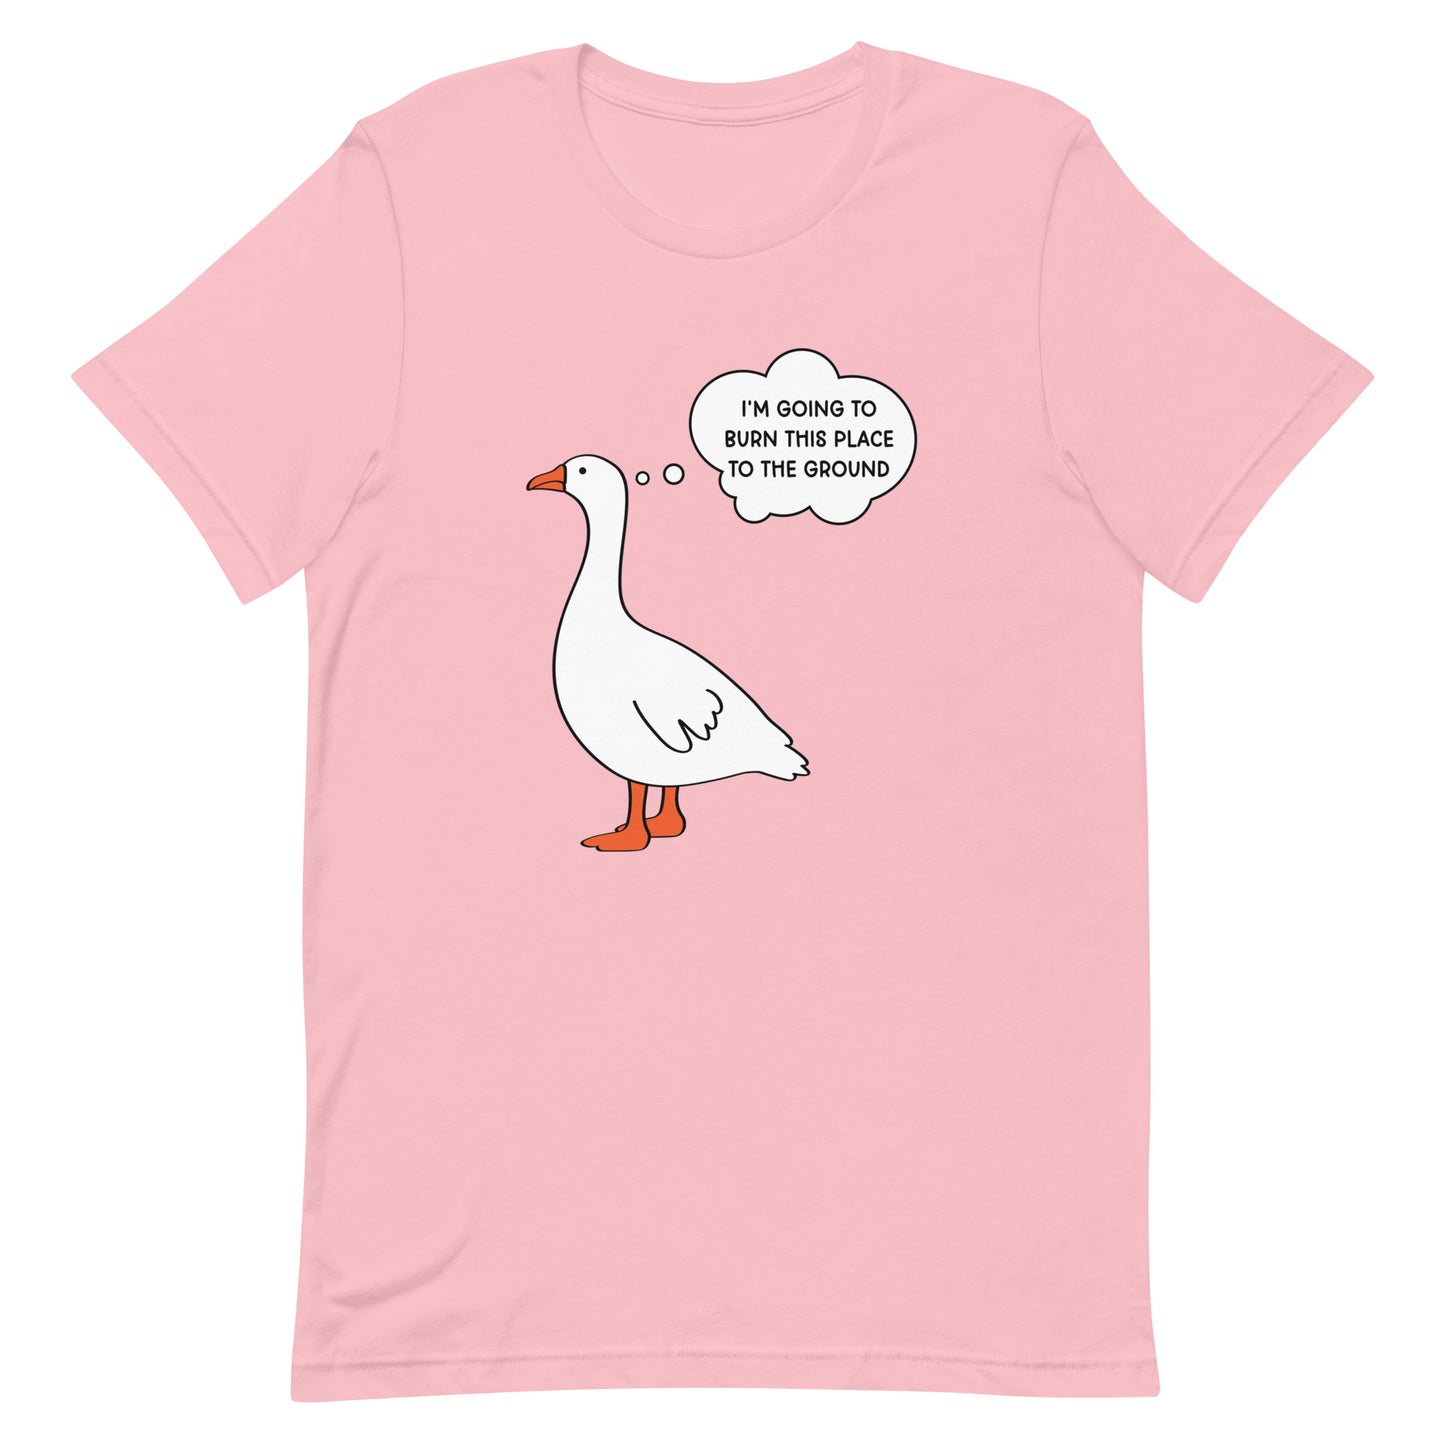 I'm Going to Burn This Place to the Ground (Goose) Unisex t-shirt